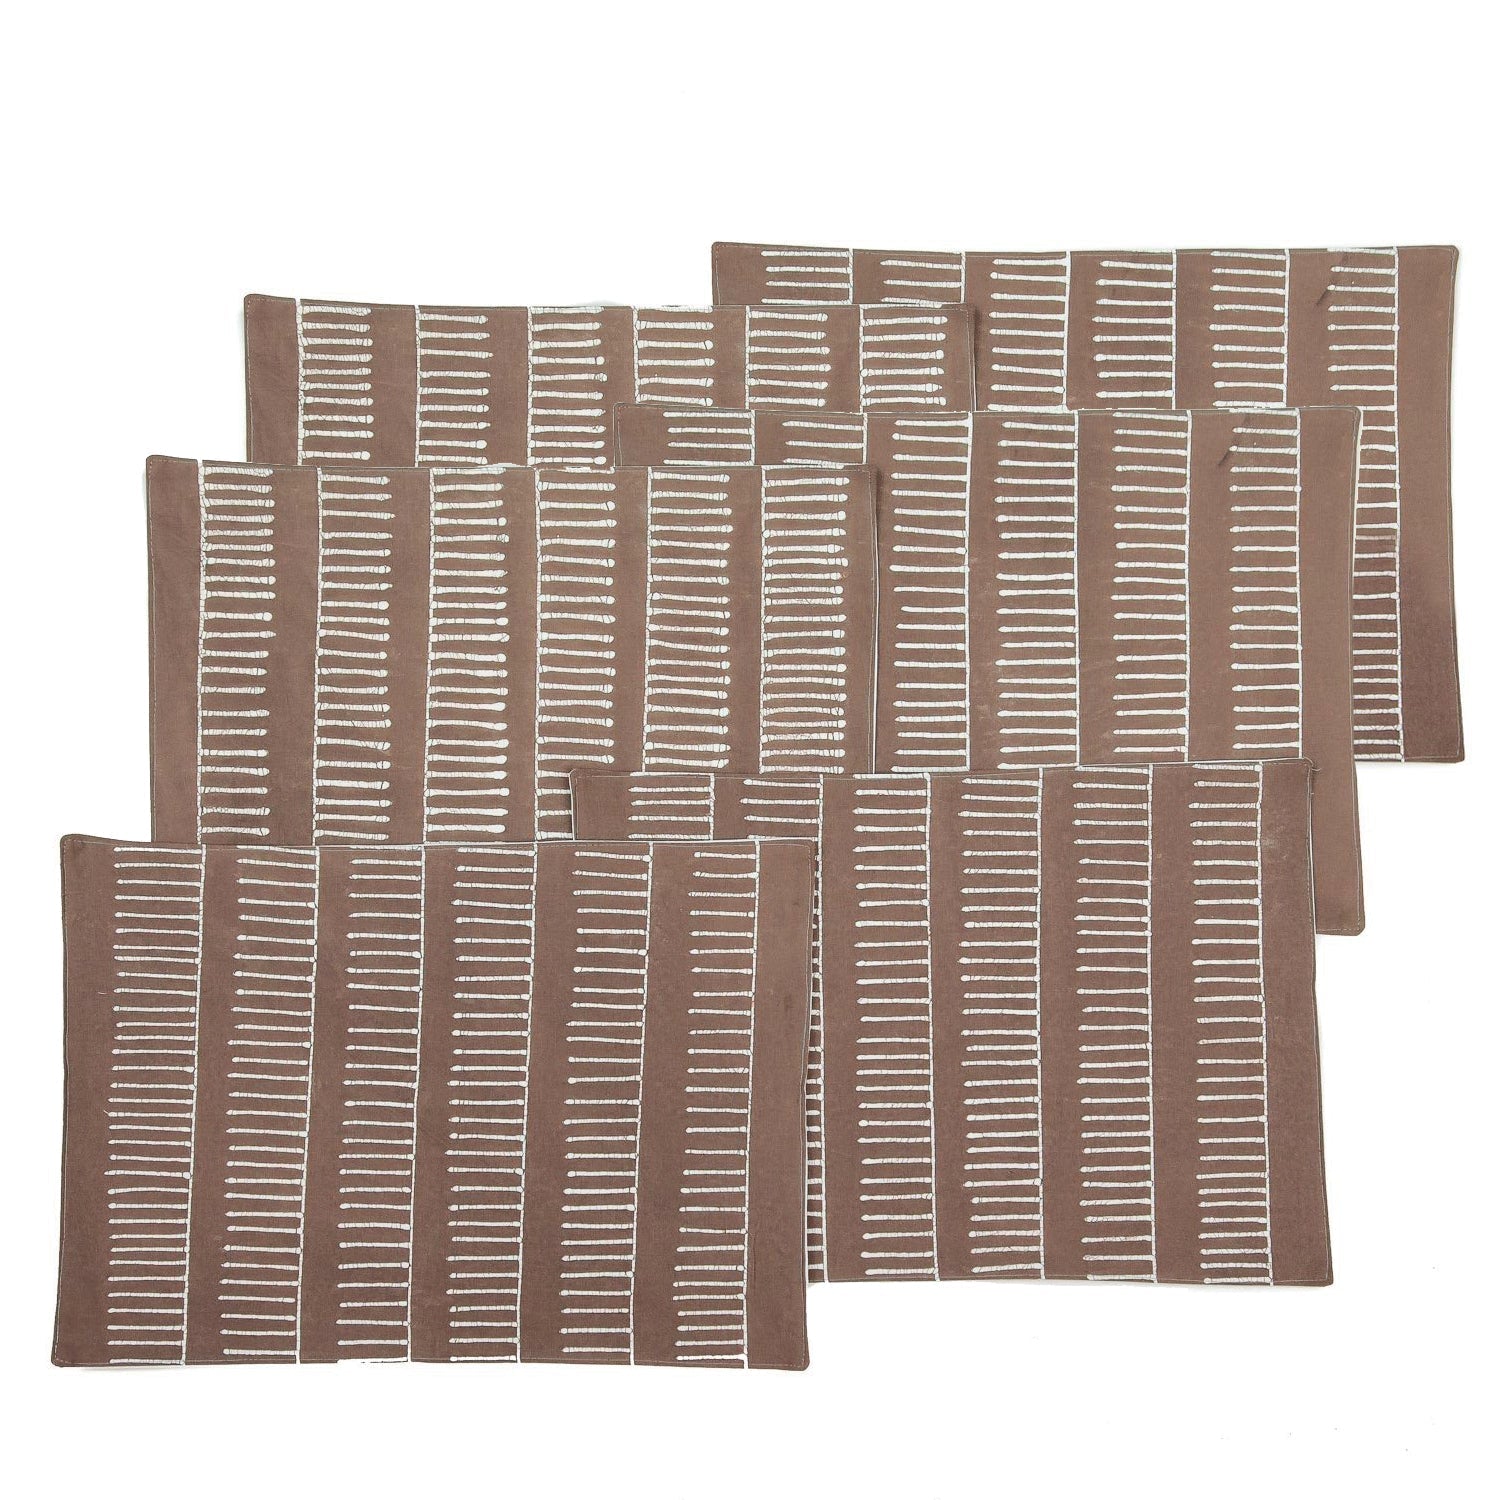 The perfect dark taupe table mats adorned with a stunning linear pattern, made on 100% cotton.